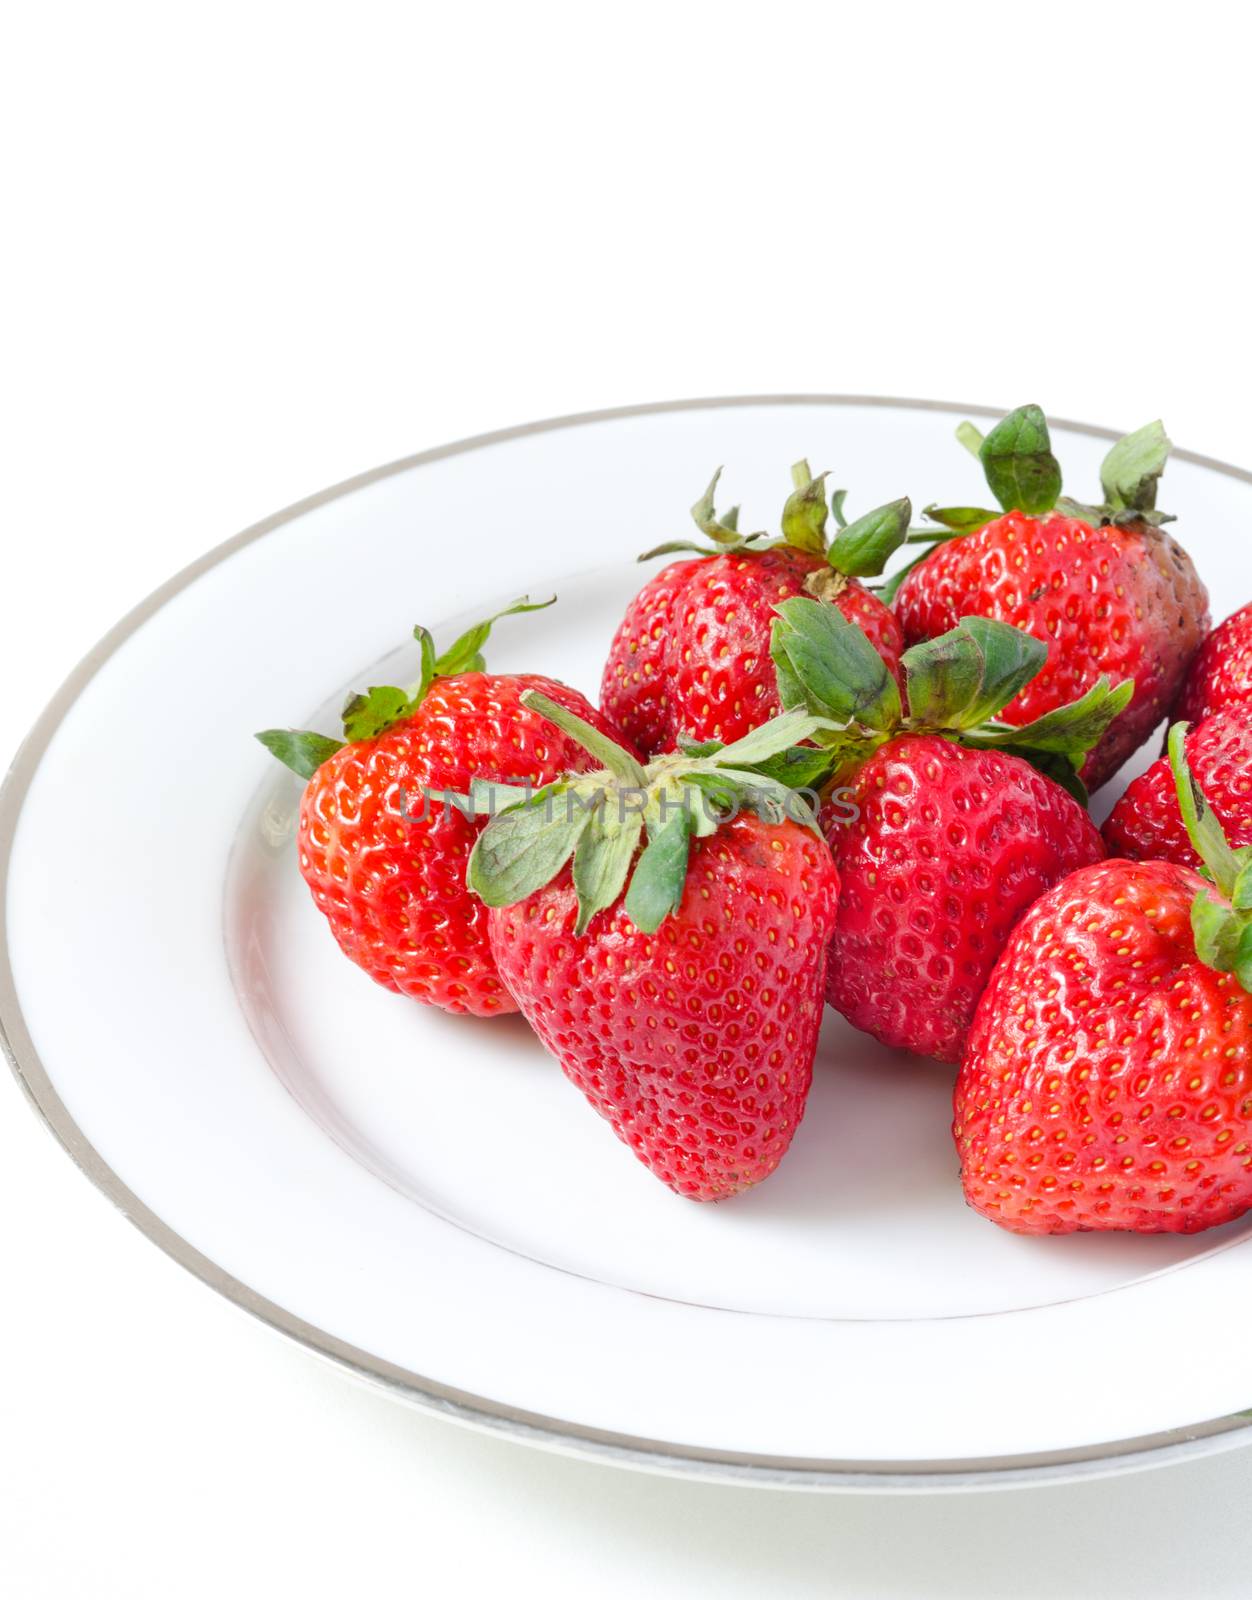 Ripe strawberries in a porcelain plate  by siraanamwong